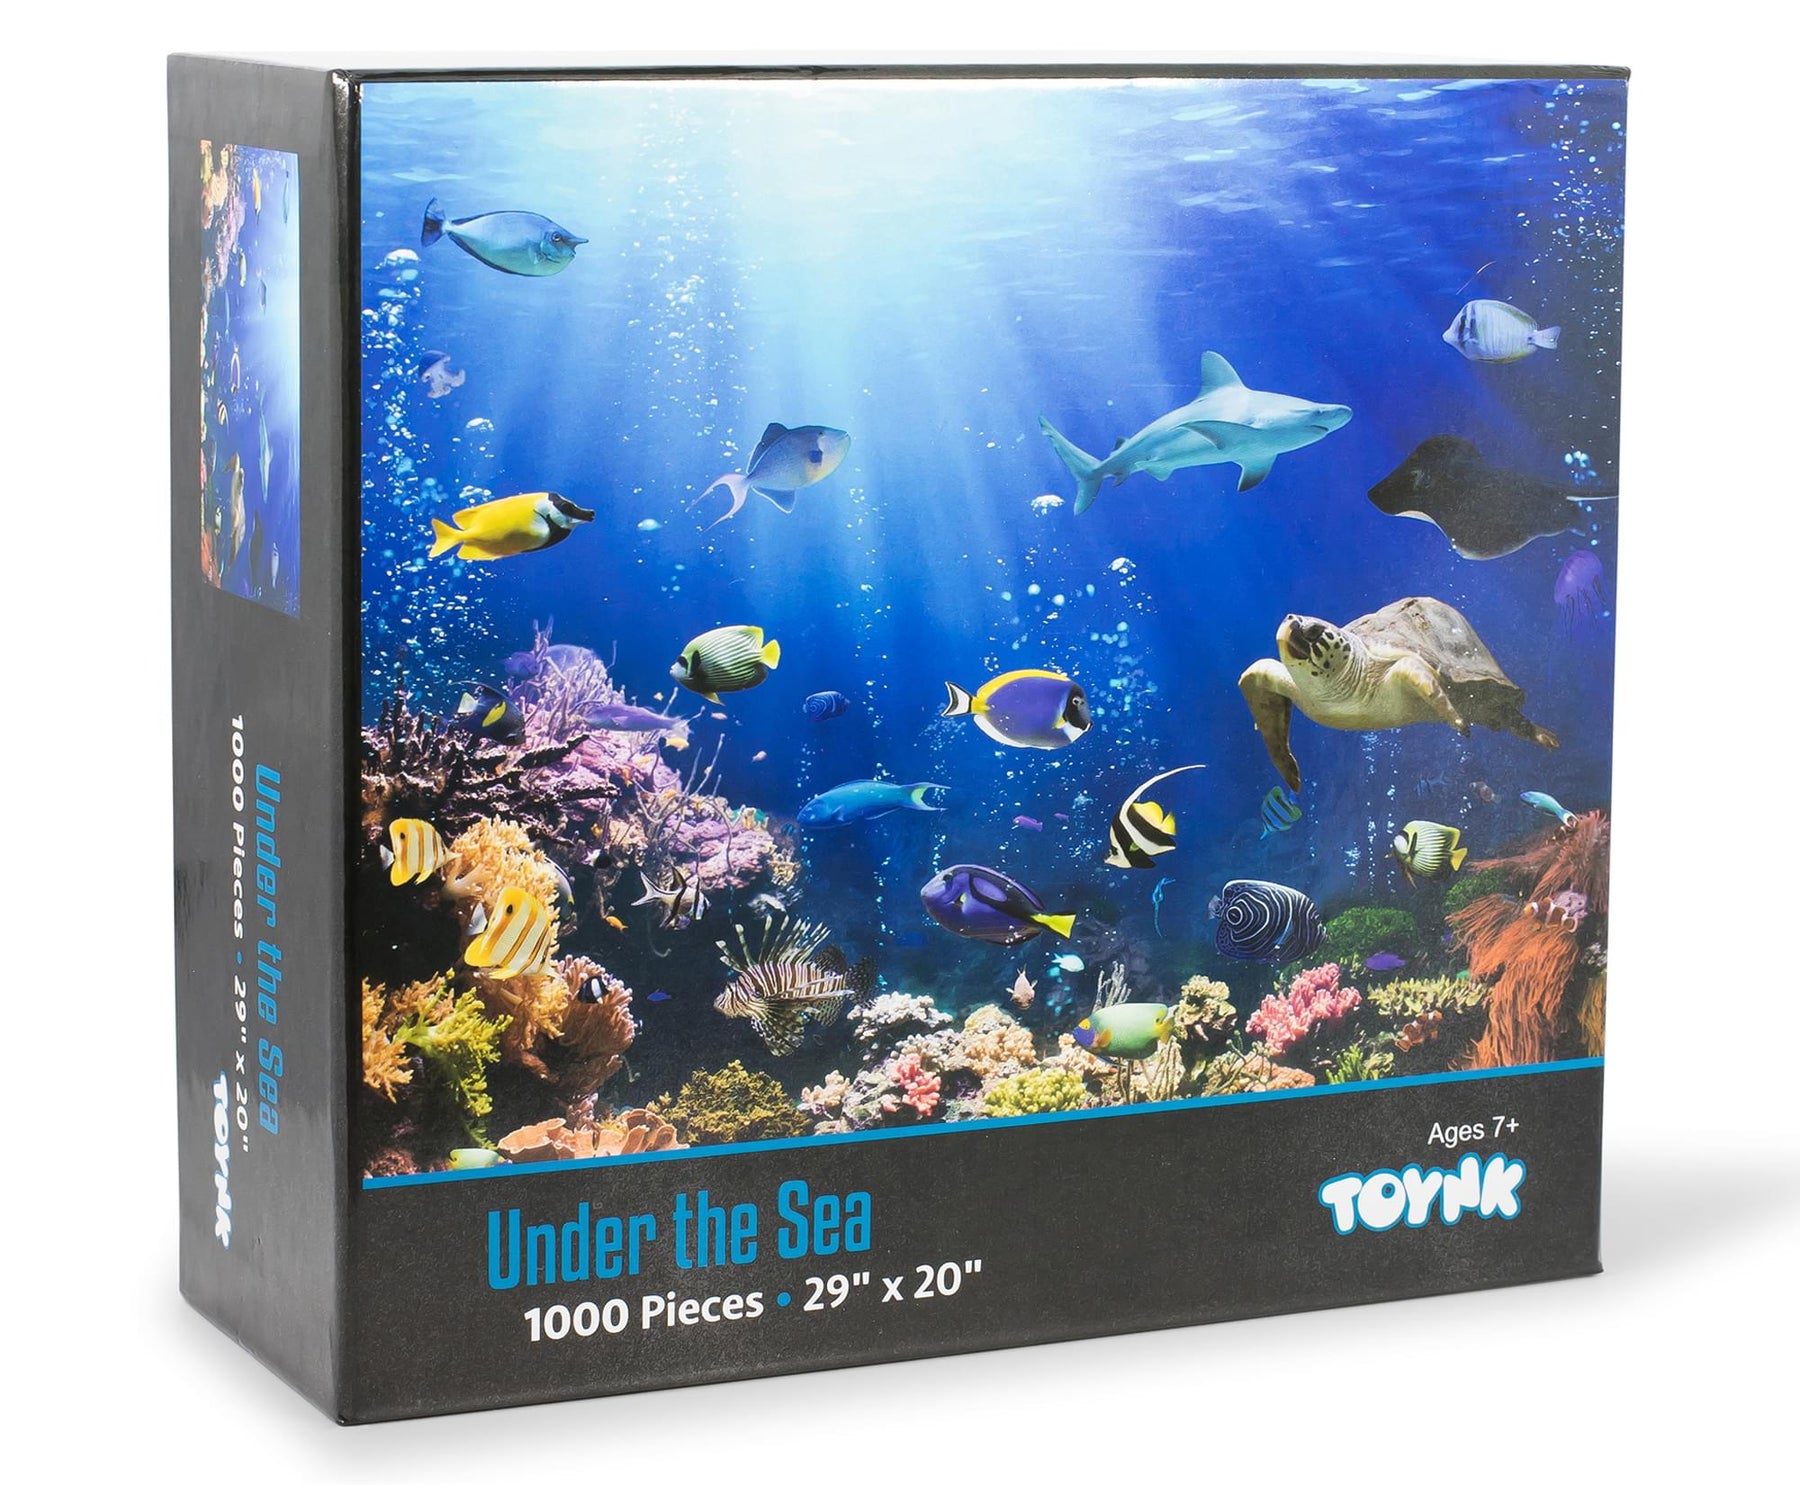 Under the Sea Ocean Puzzle For Adults And Kids | 1000 Piece Jigsaw Puzzle